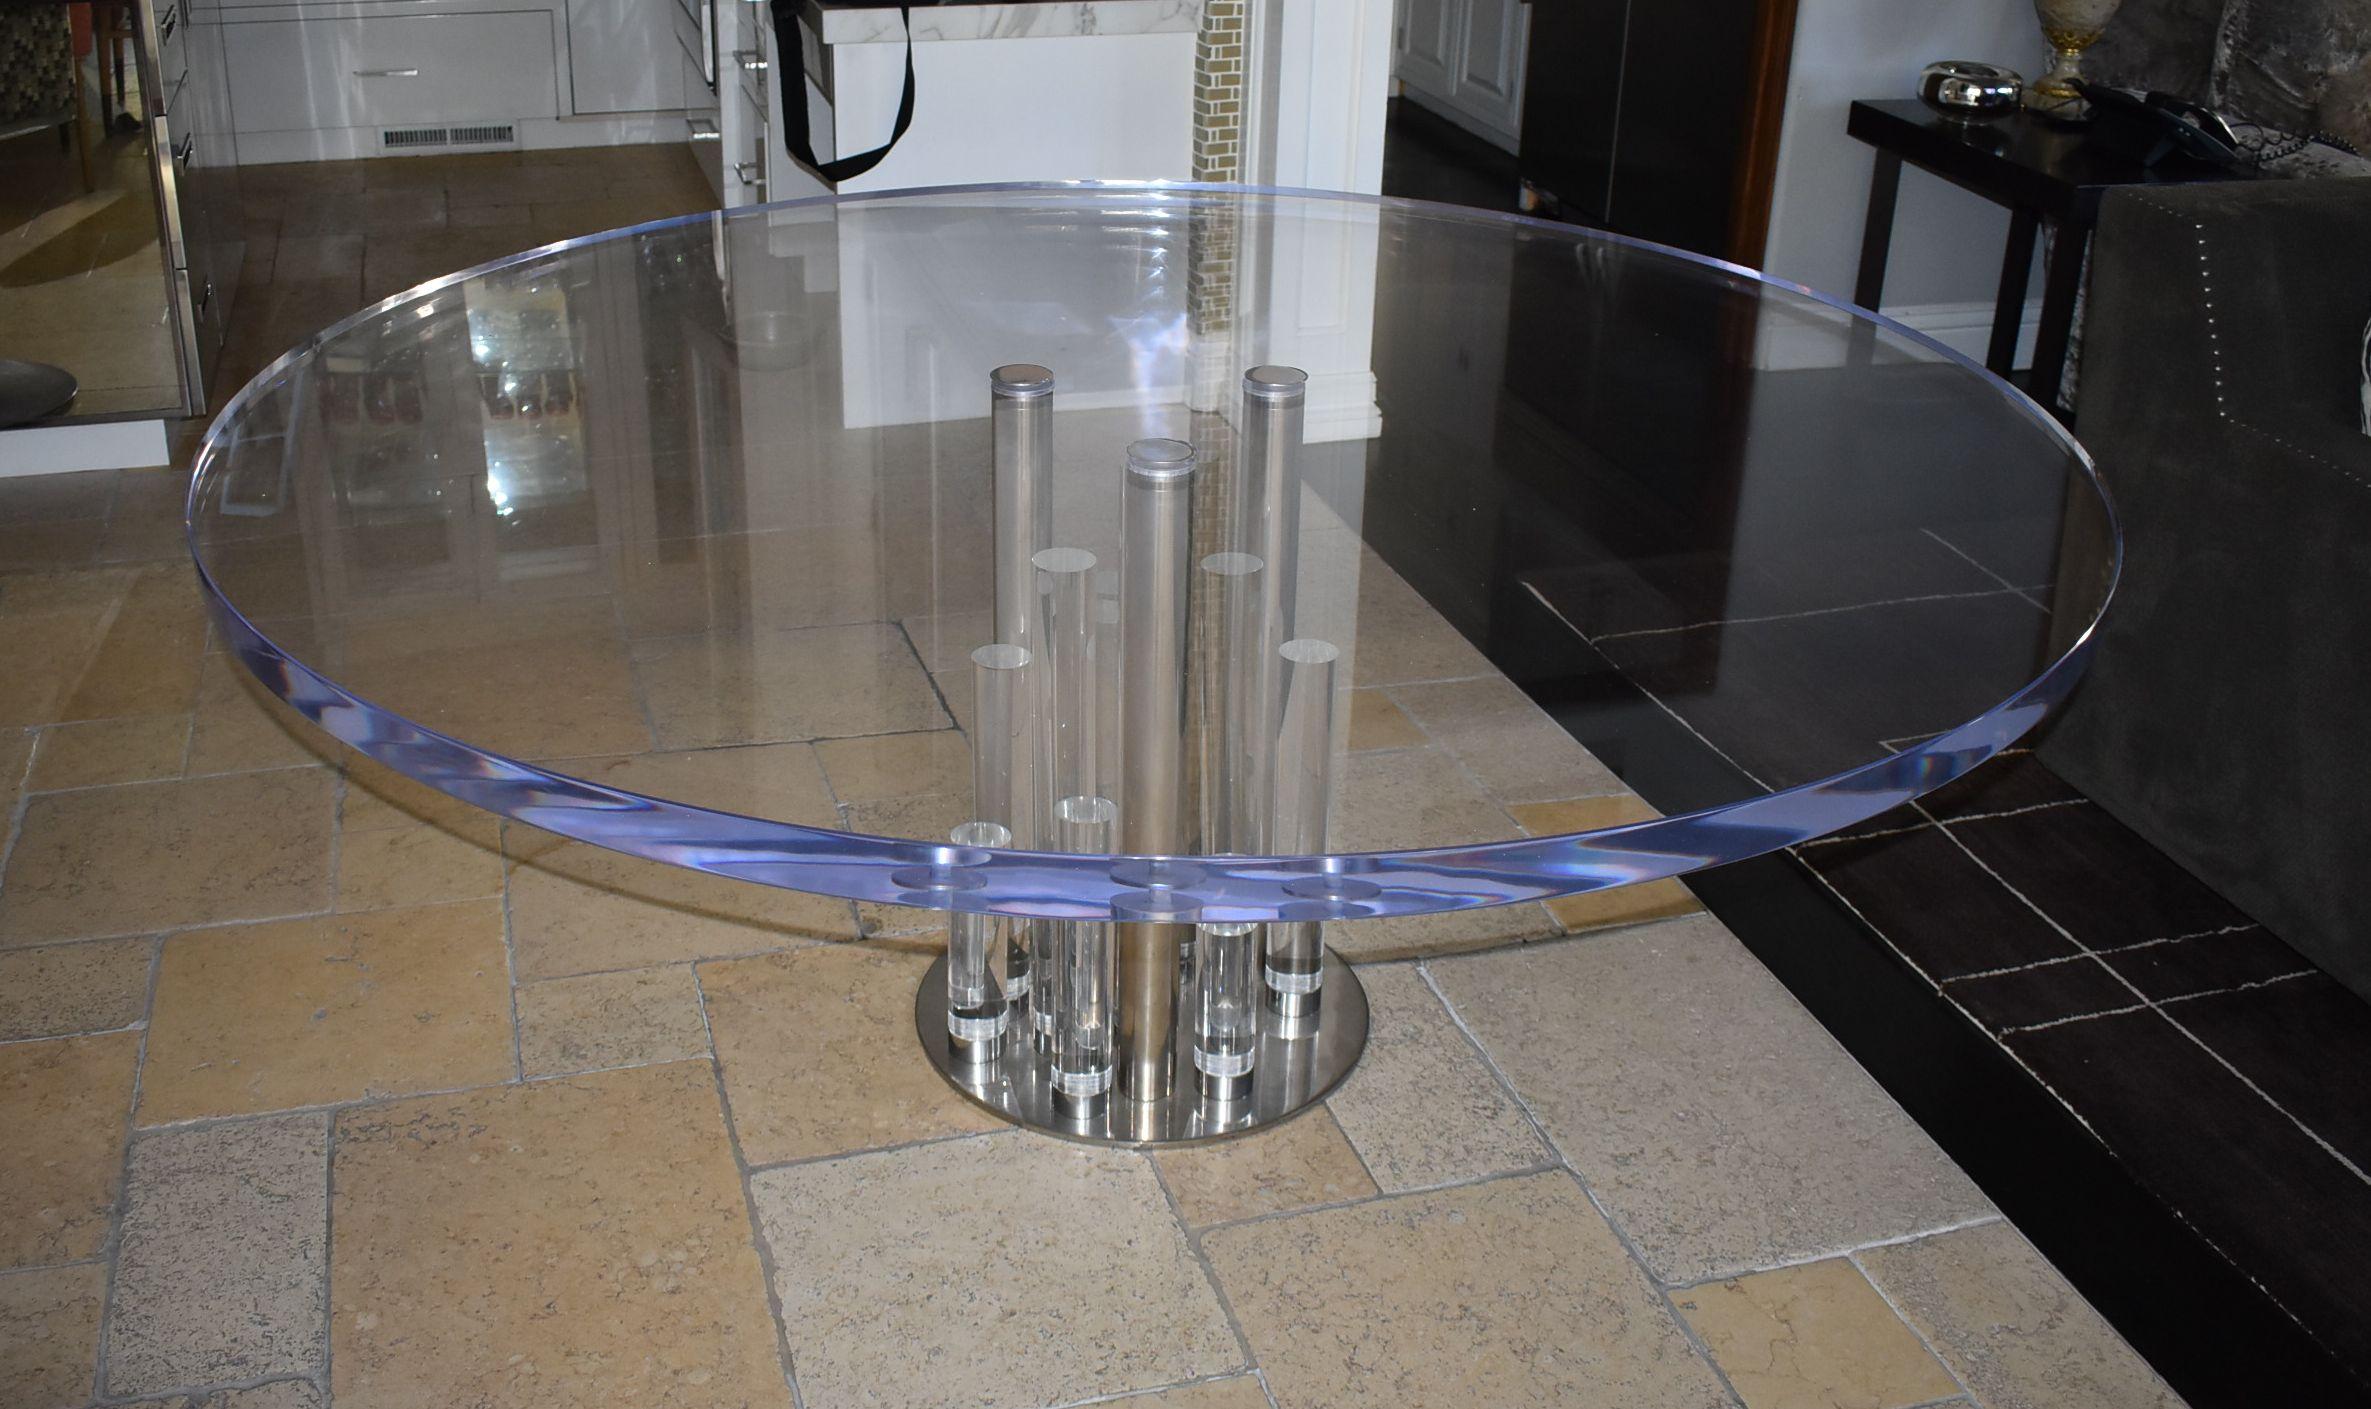 6ft diameter Lucite dining table with 2 inches thick top and chrome details design by Charles Hollis Jones part of his Post Line Collection.
Measure: Diameter of base 20 inches

Provenance: Directly from Charles Hollis Jones private